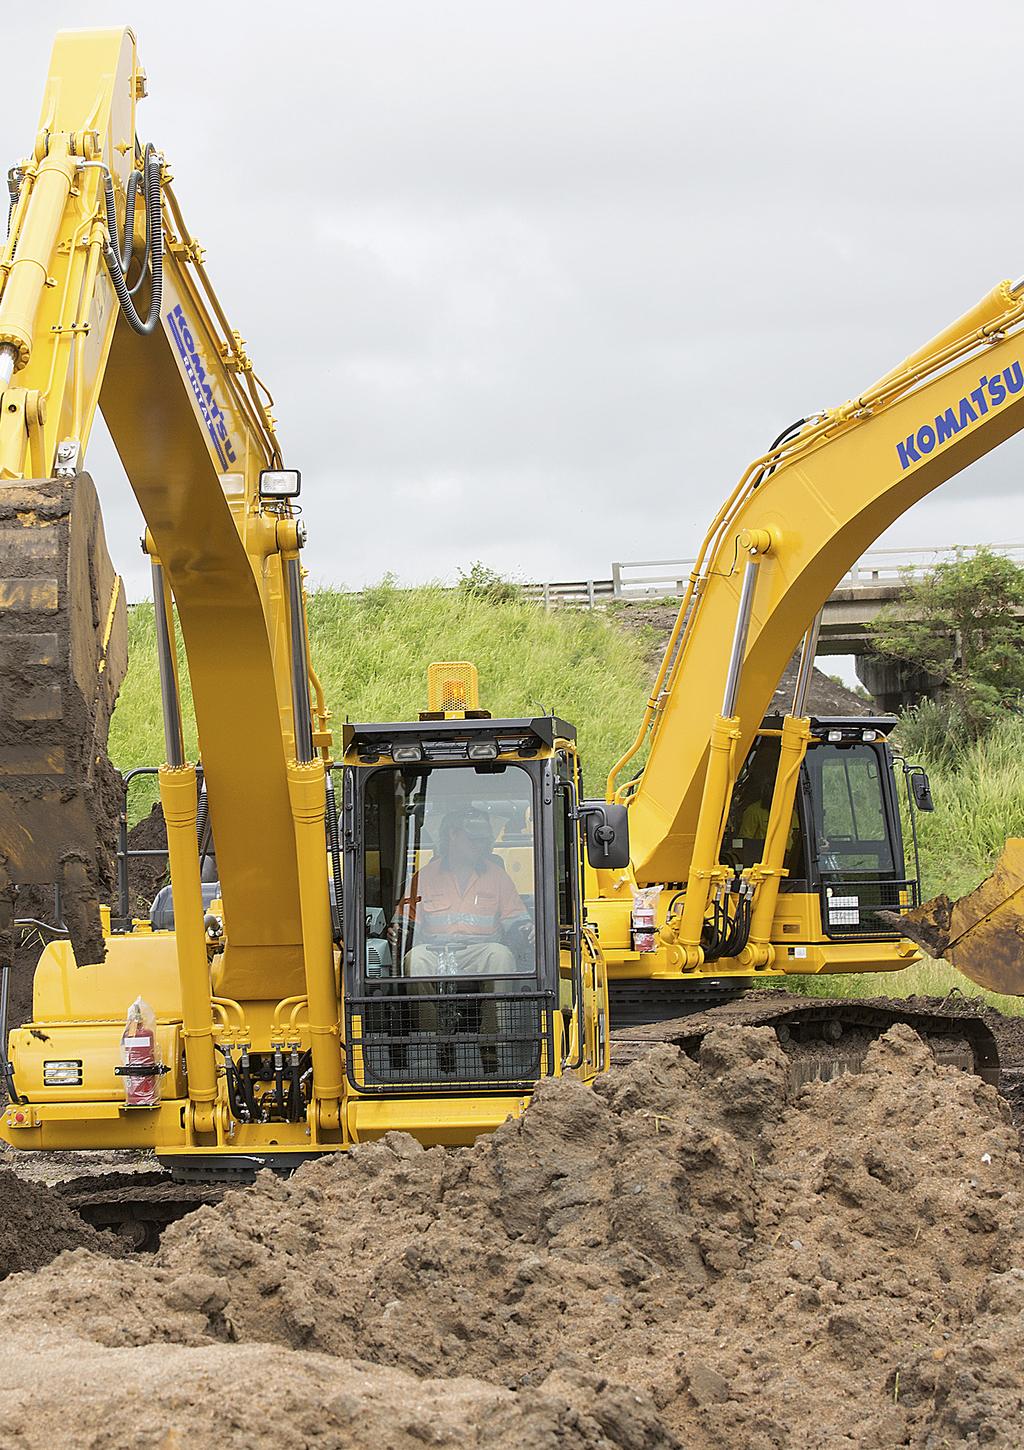 Rental Solutions Komatsu s latest state-of-the-art construction equipment and after sales service is now available to our customers through Komatsu Rental.